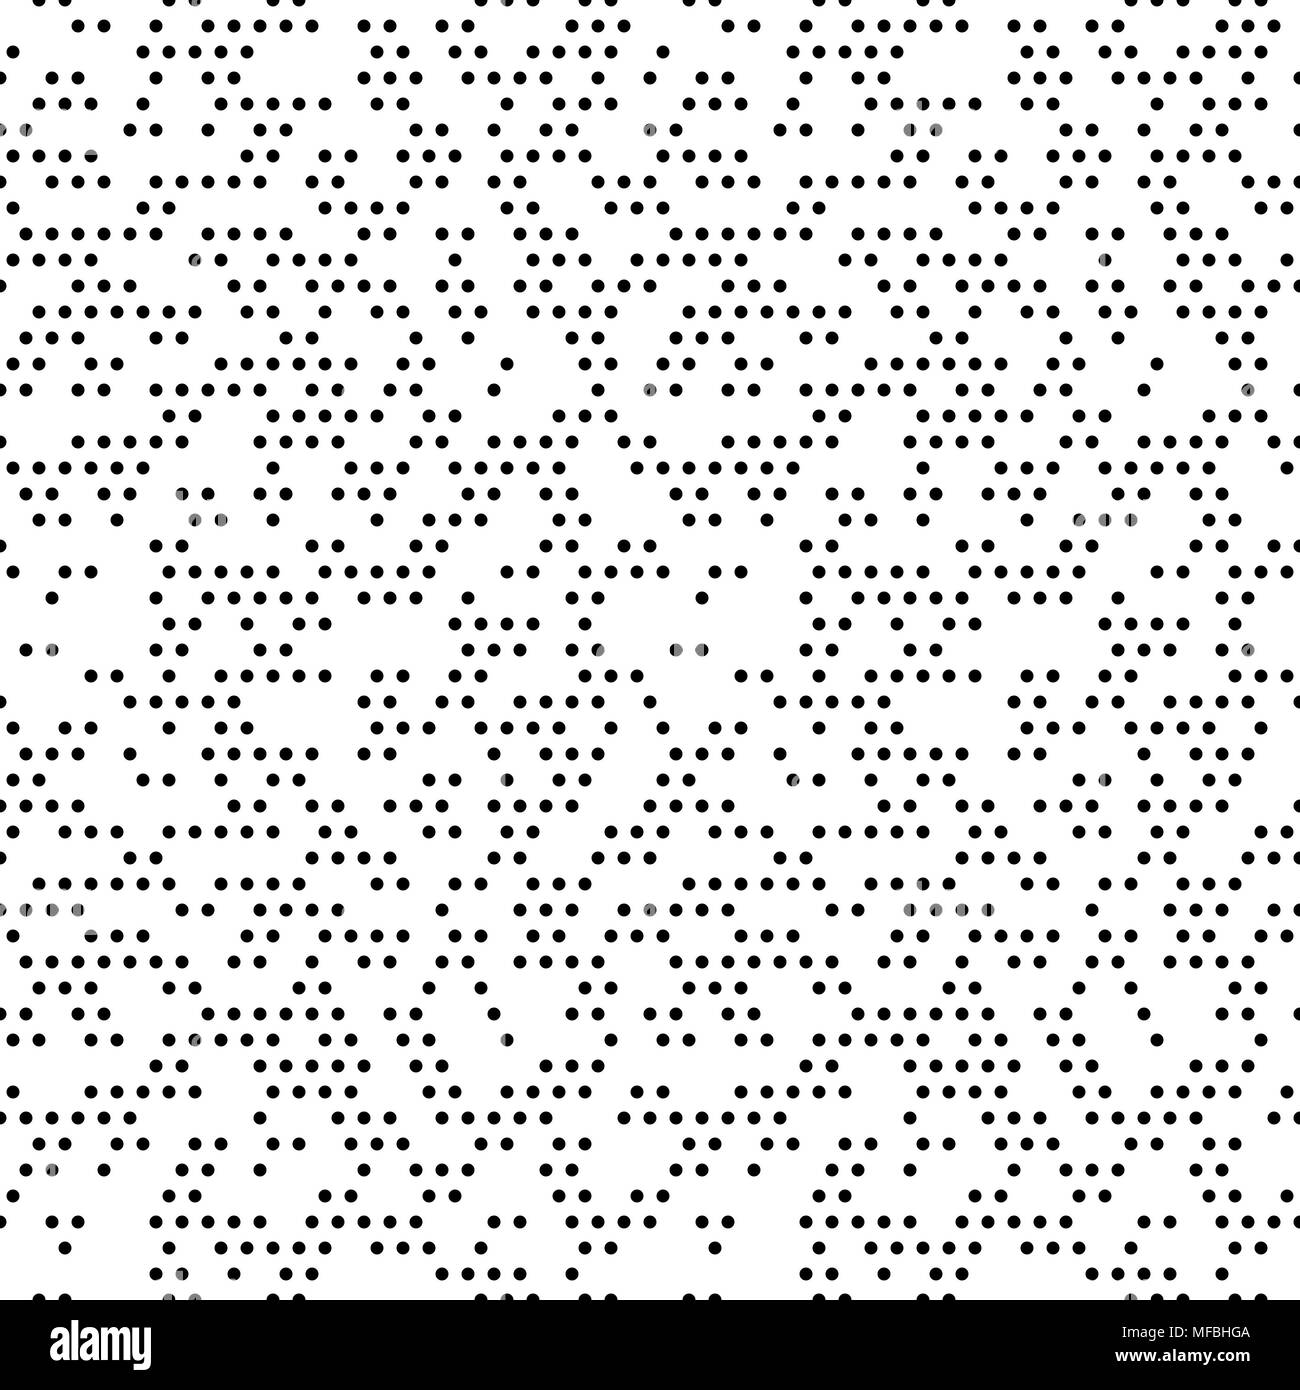 Seamless Modern Vector Pattern With Dots Stock Vector